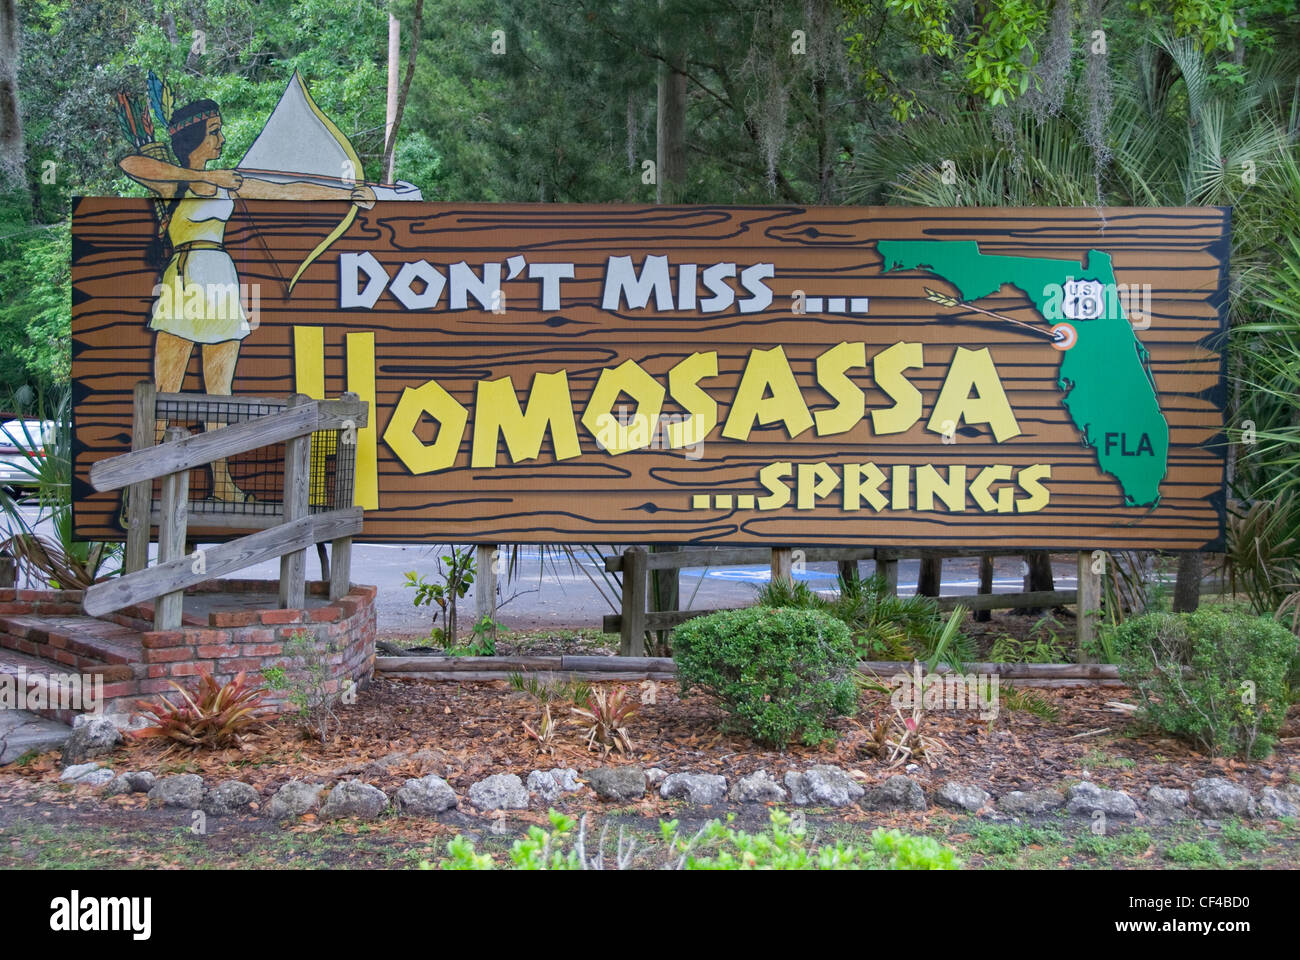 Homosassa Springs wild life state park welcome sign. Florida Stock Photo